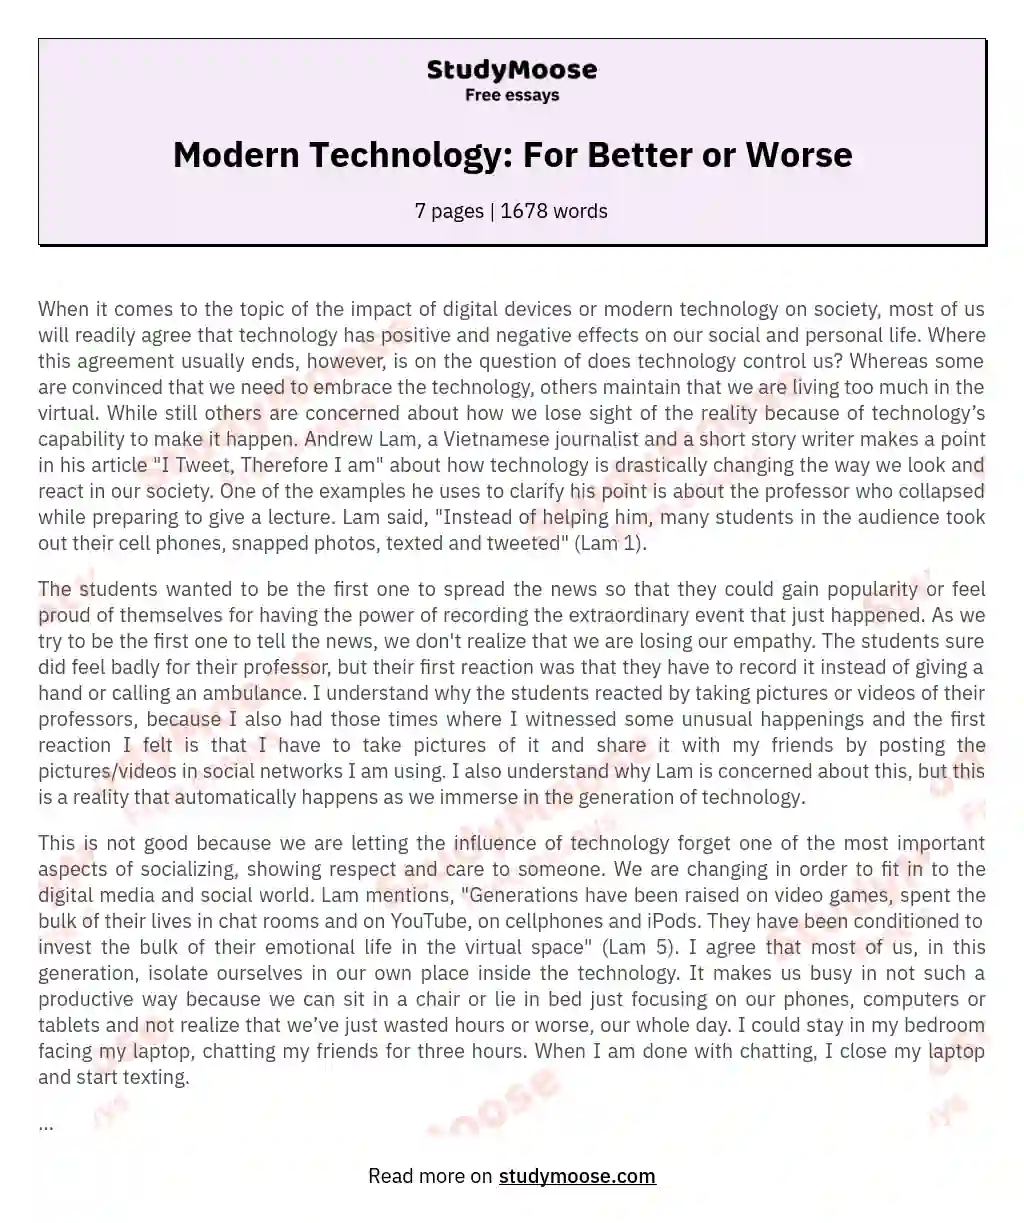 Modern Technology: For Better or Worse essay